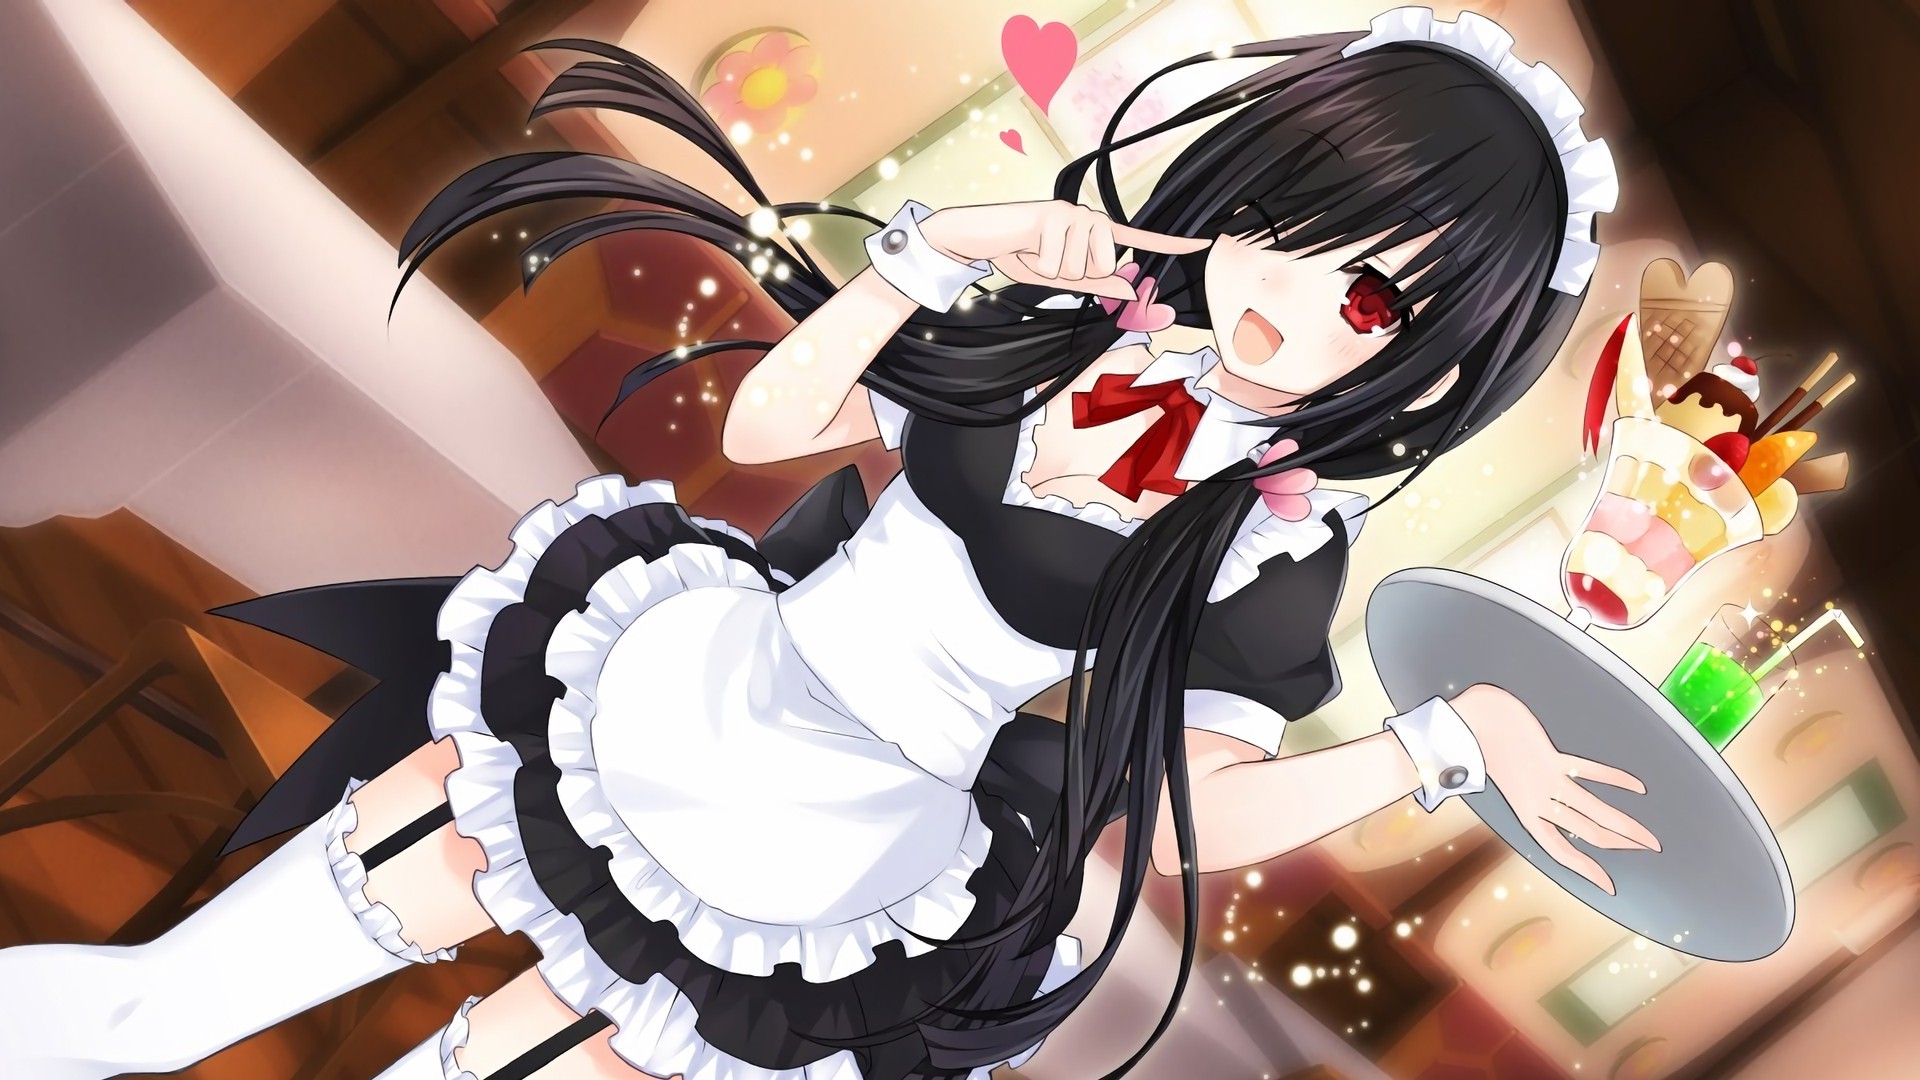 Maid Wallpapers